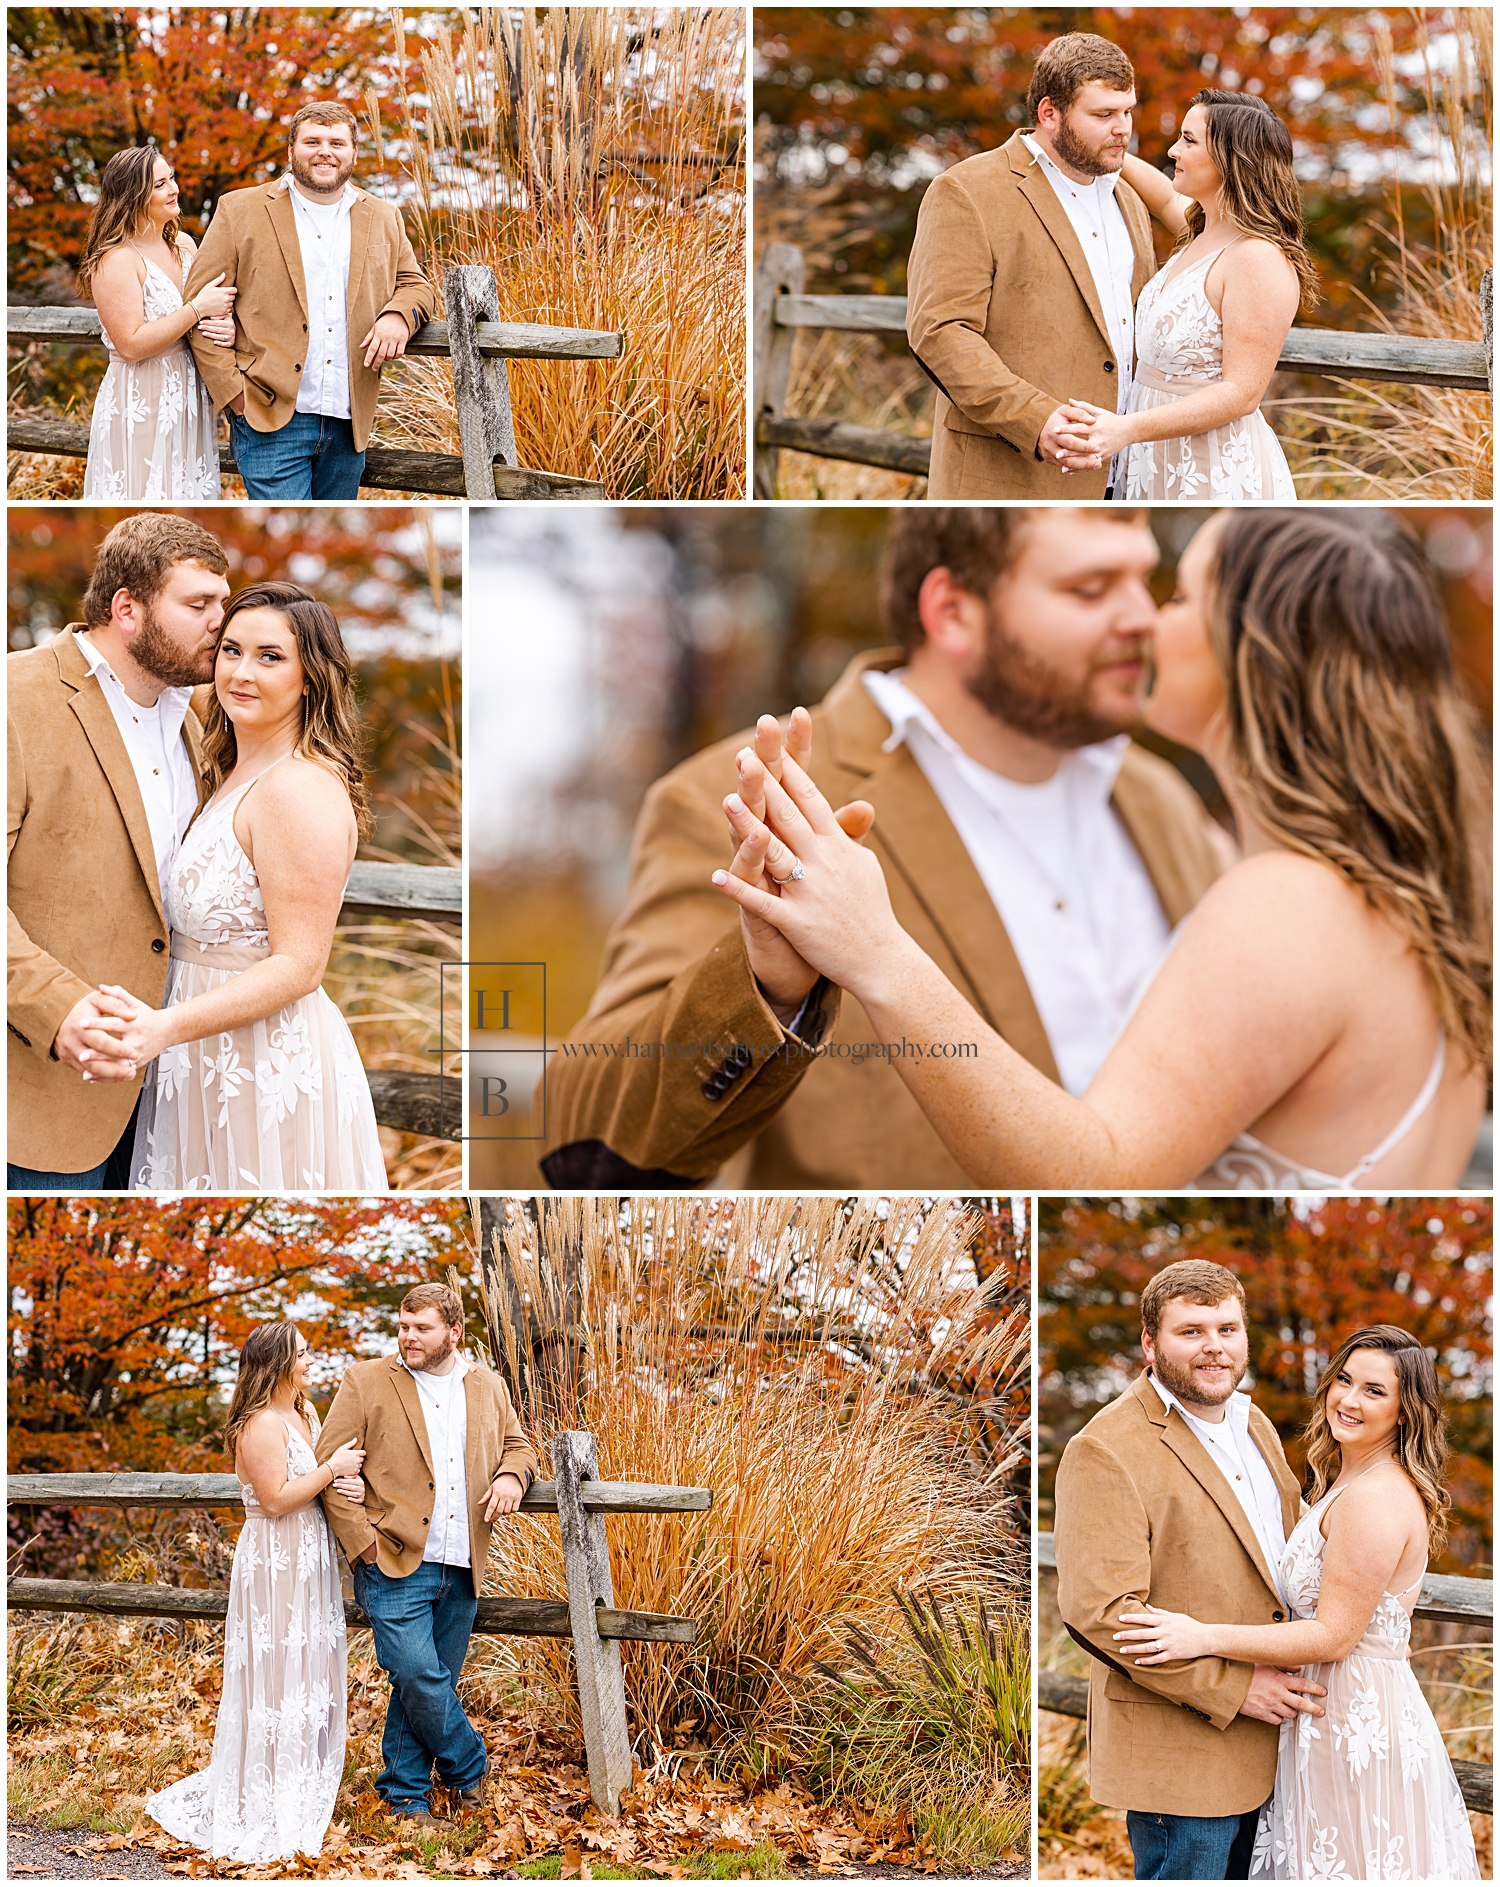 Collage of Couple Posing for Fall Foliage Engagement Photos